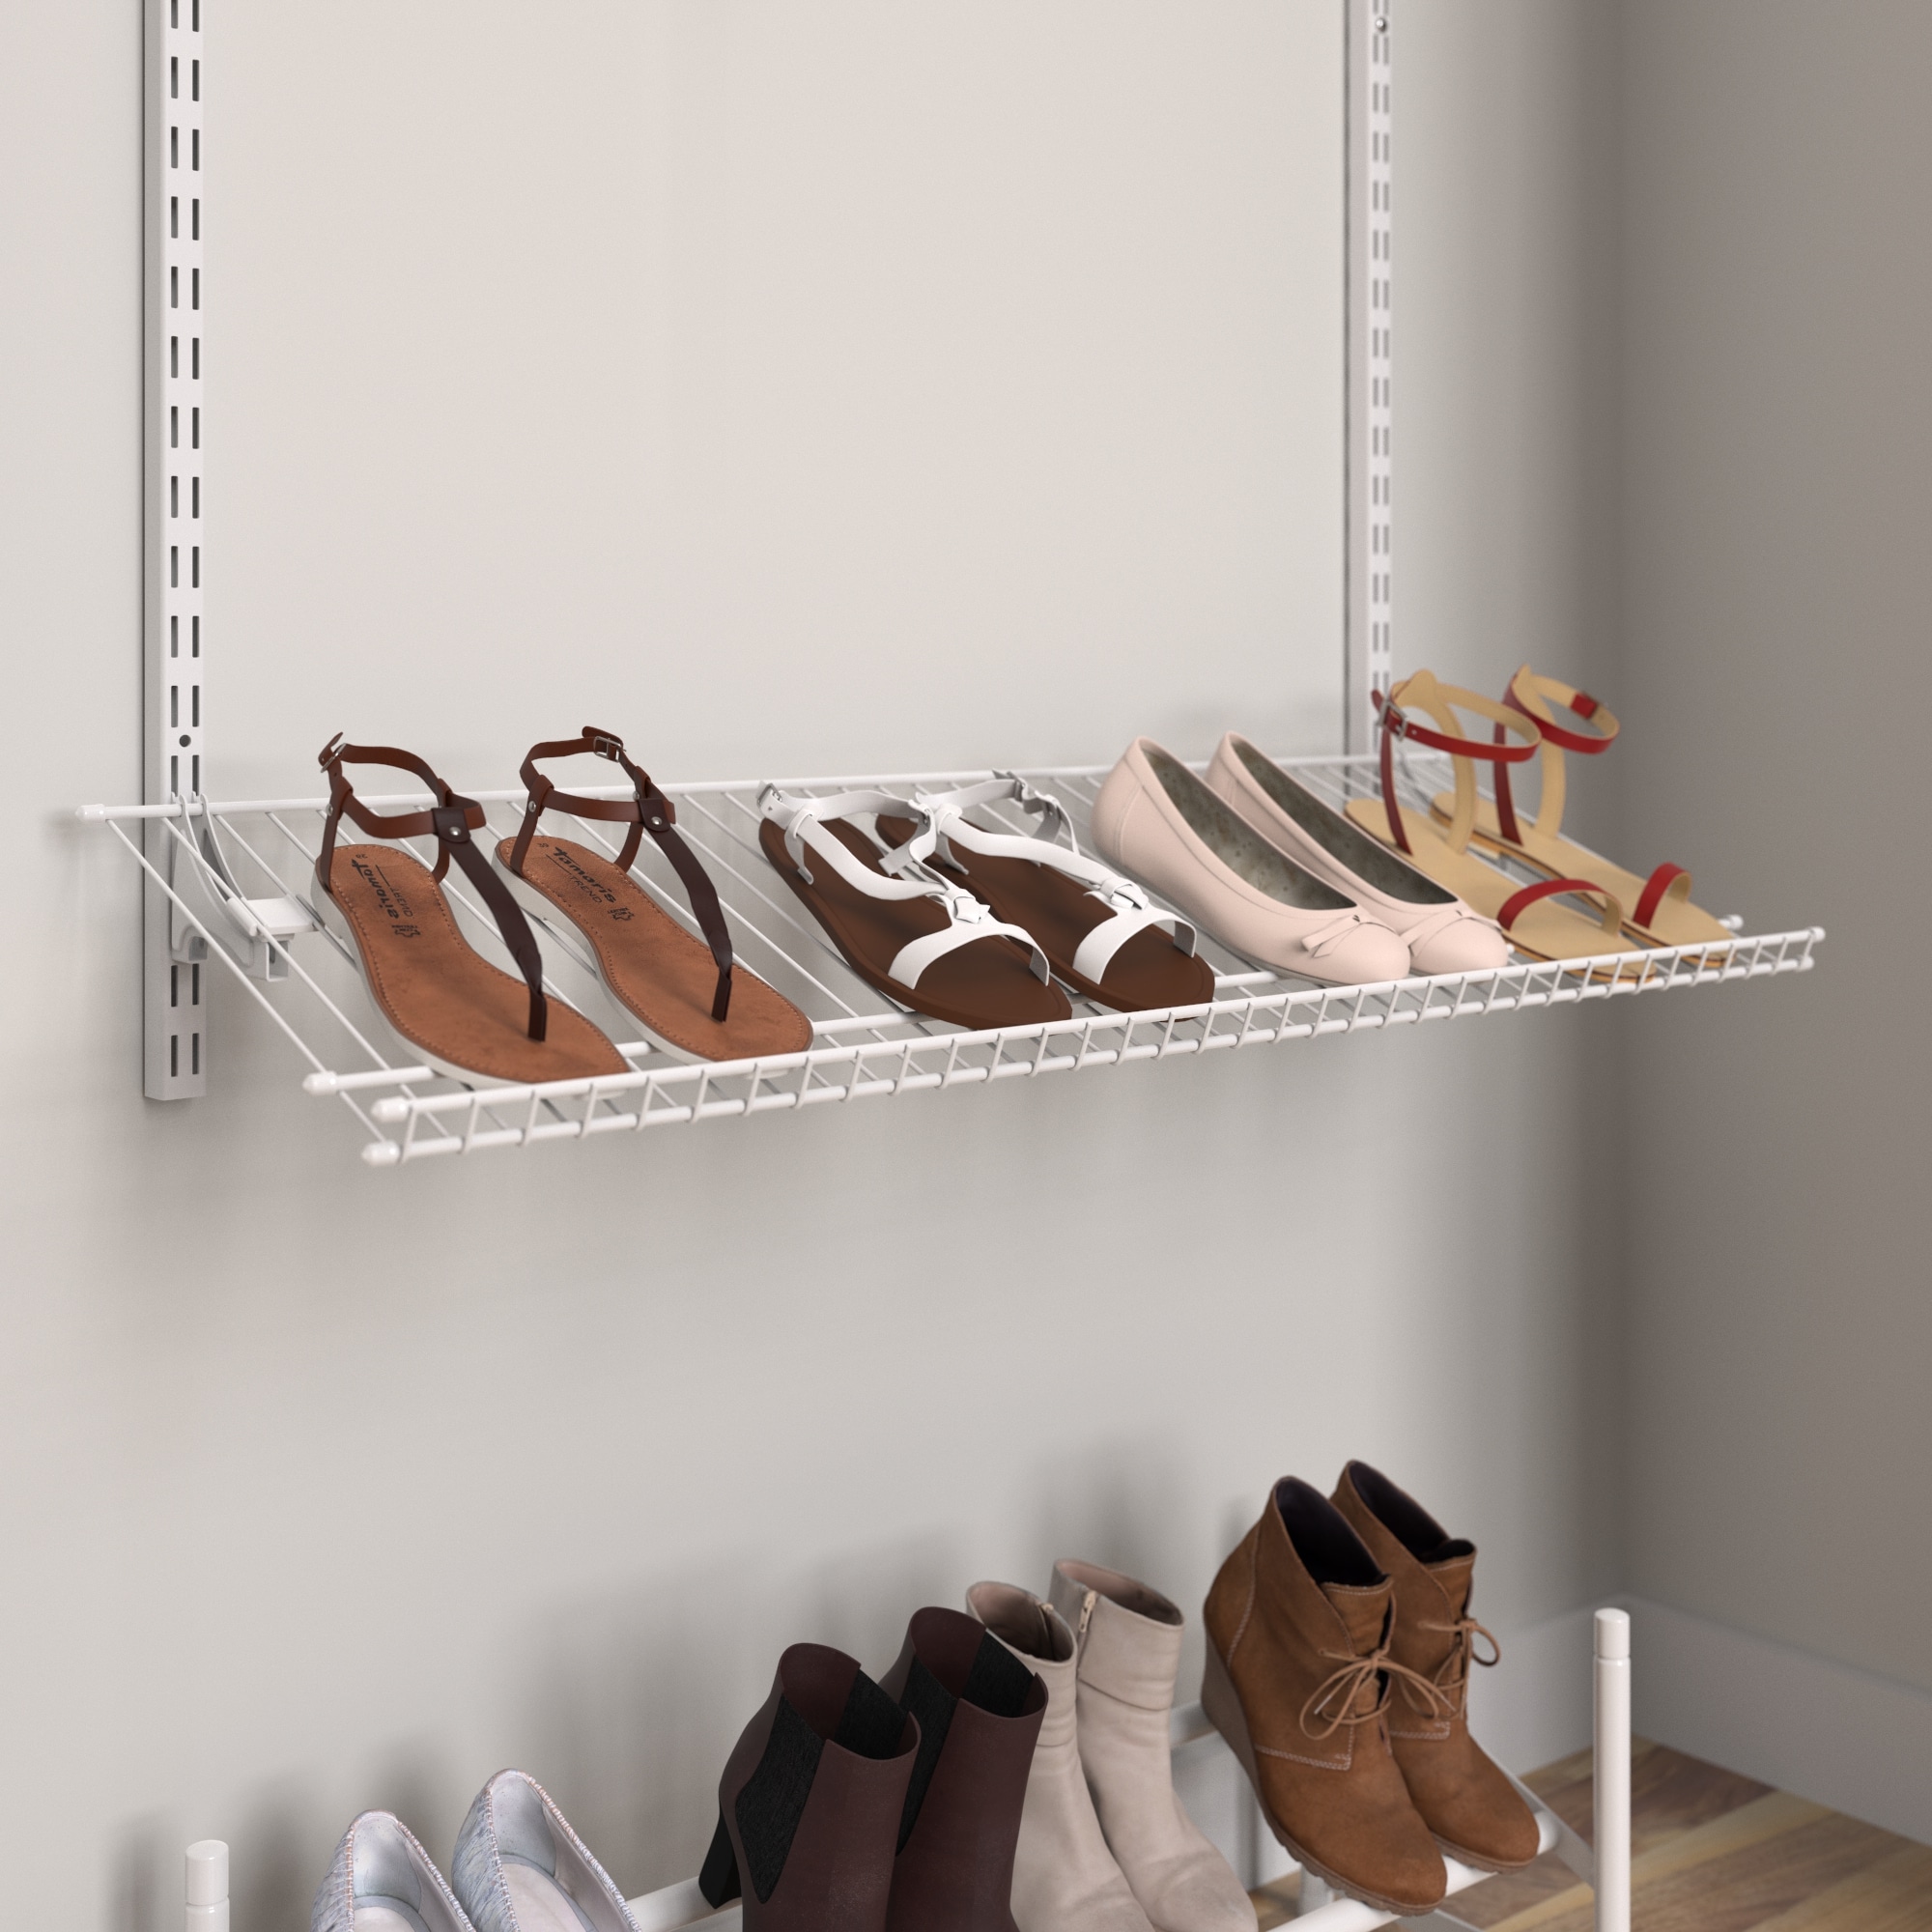 How to Add a Wire Rack Shoe Shelf to Your Closet in 5 Minutes